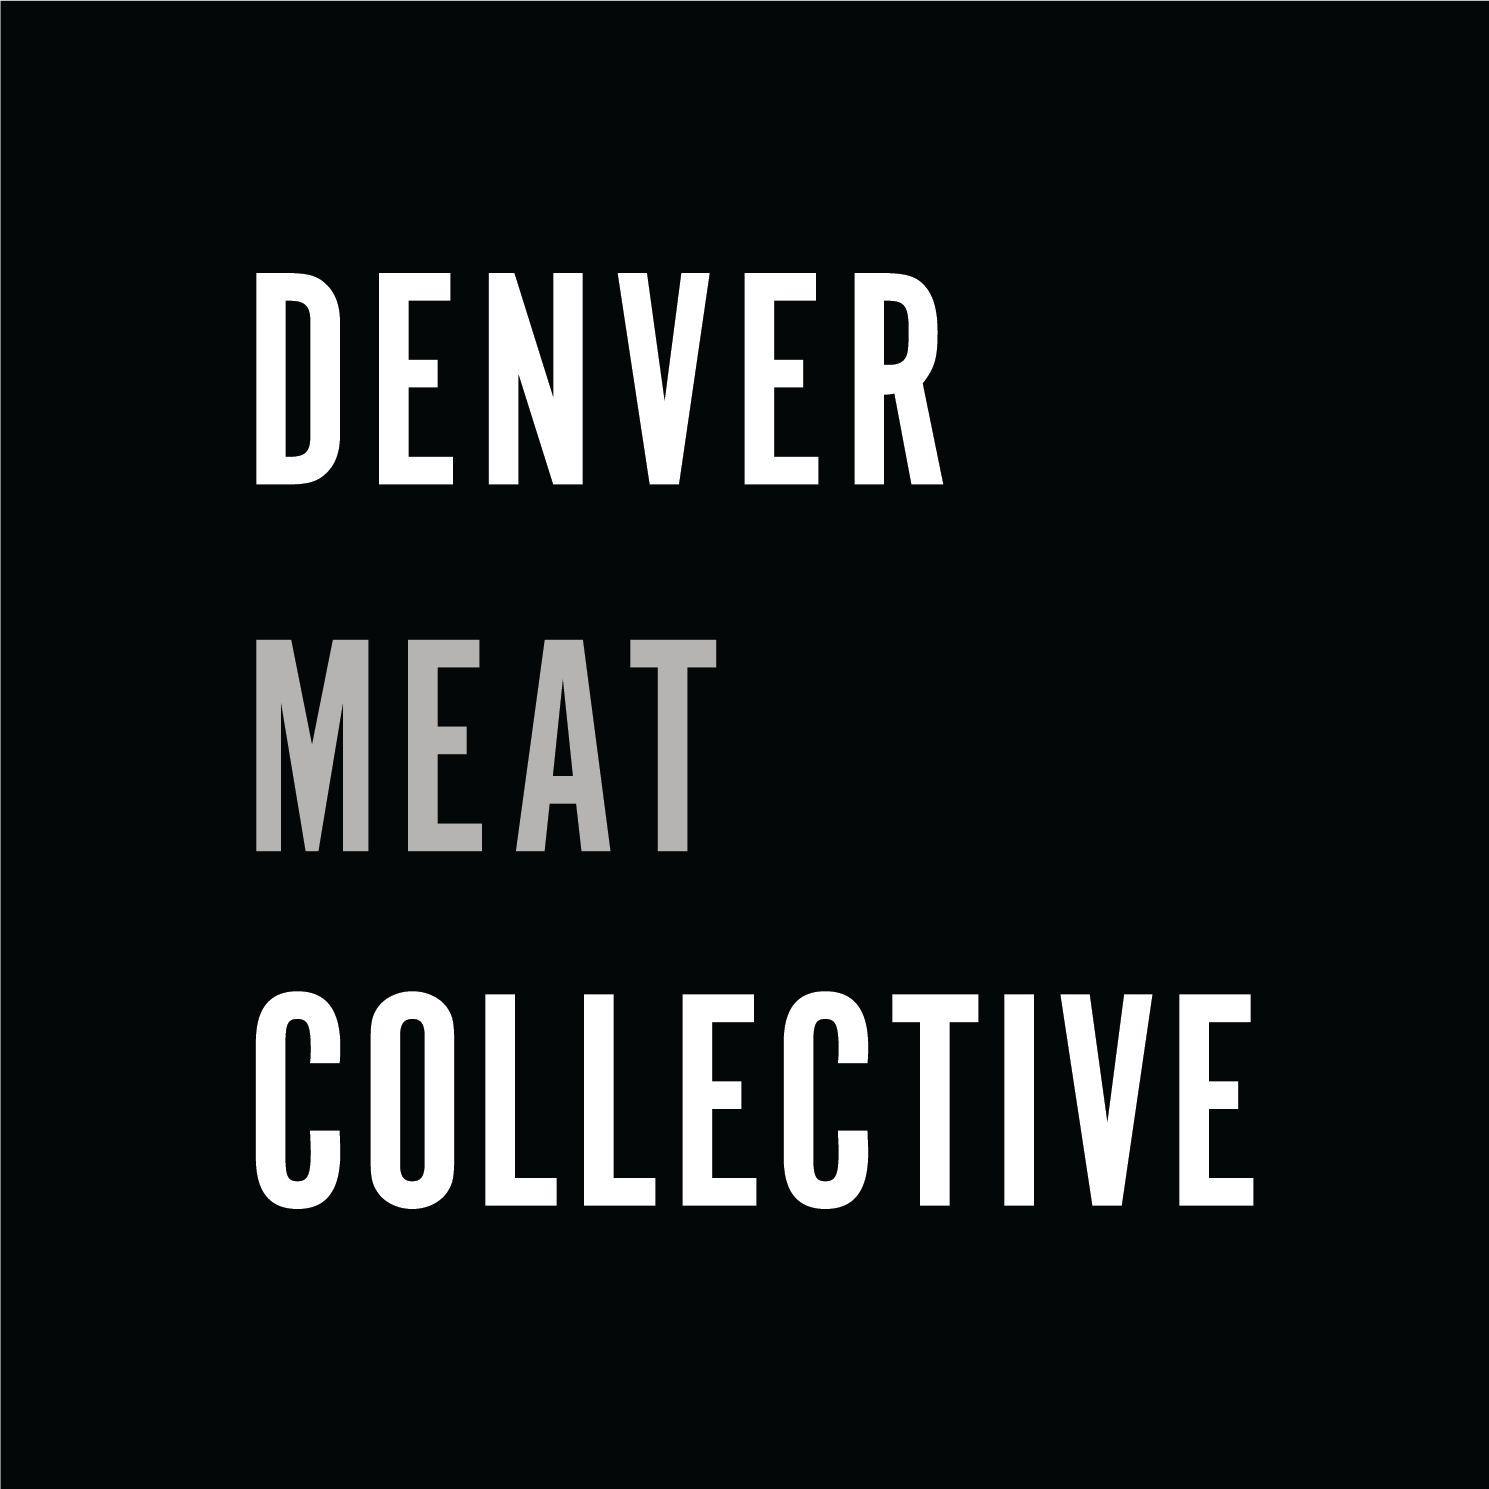 denver meat collective logo by courtney hilow